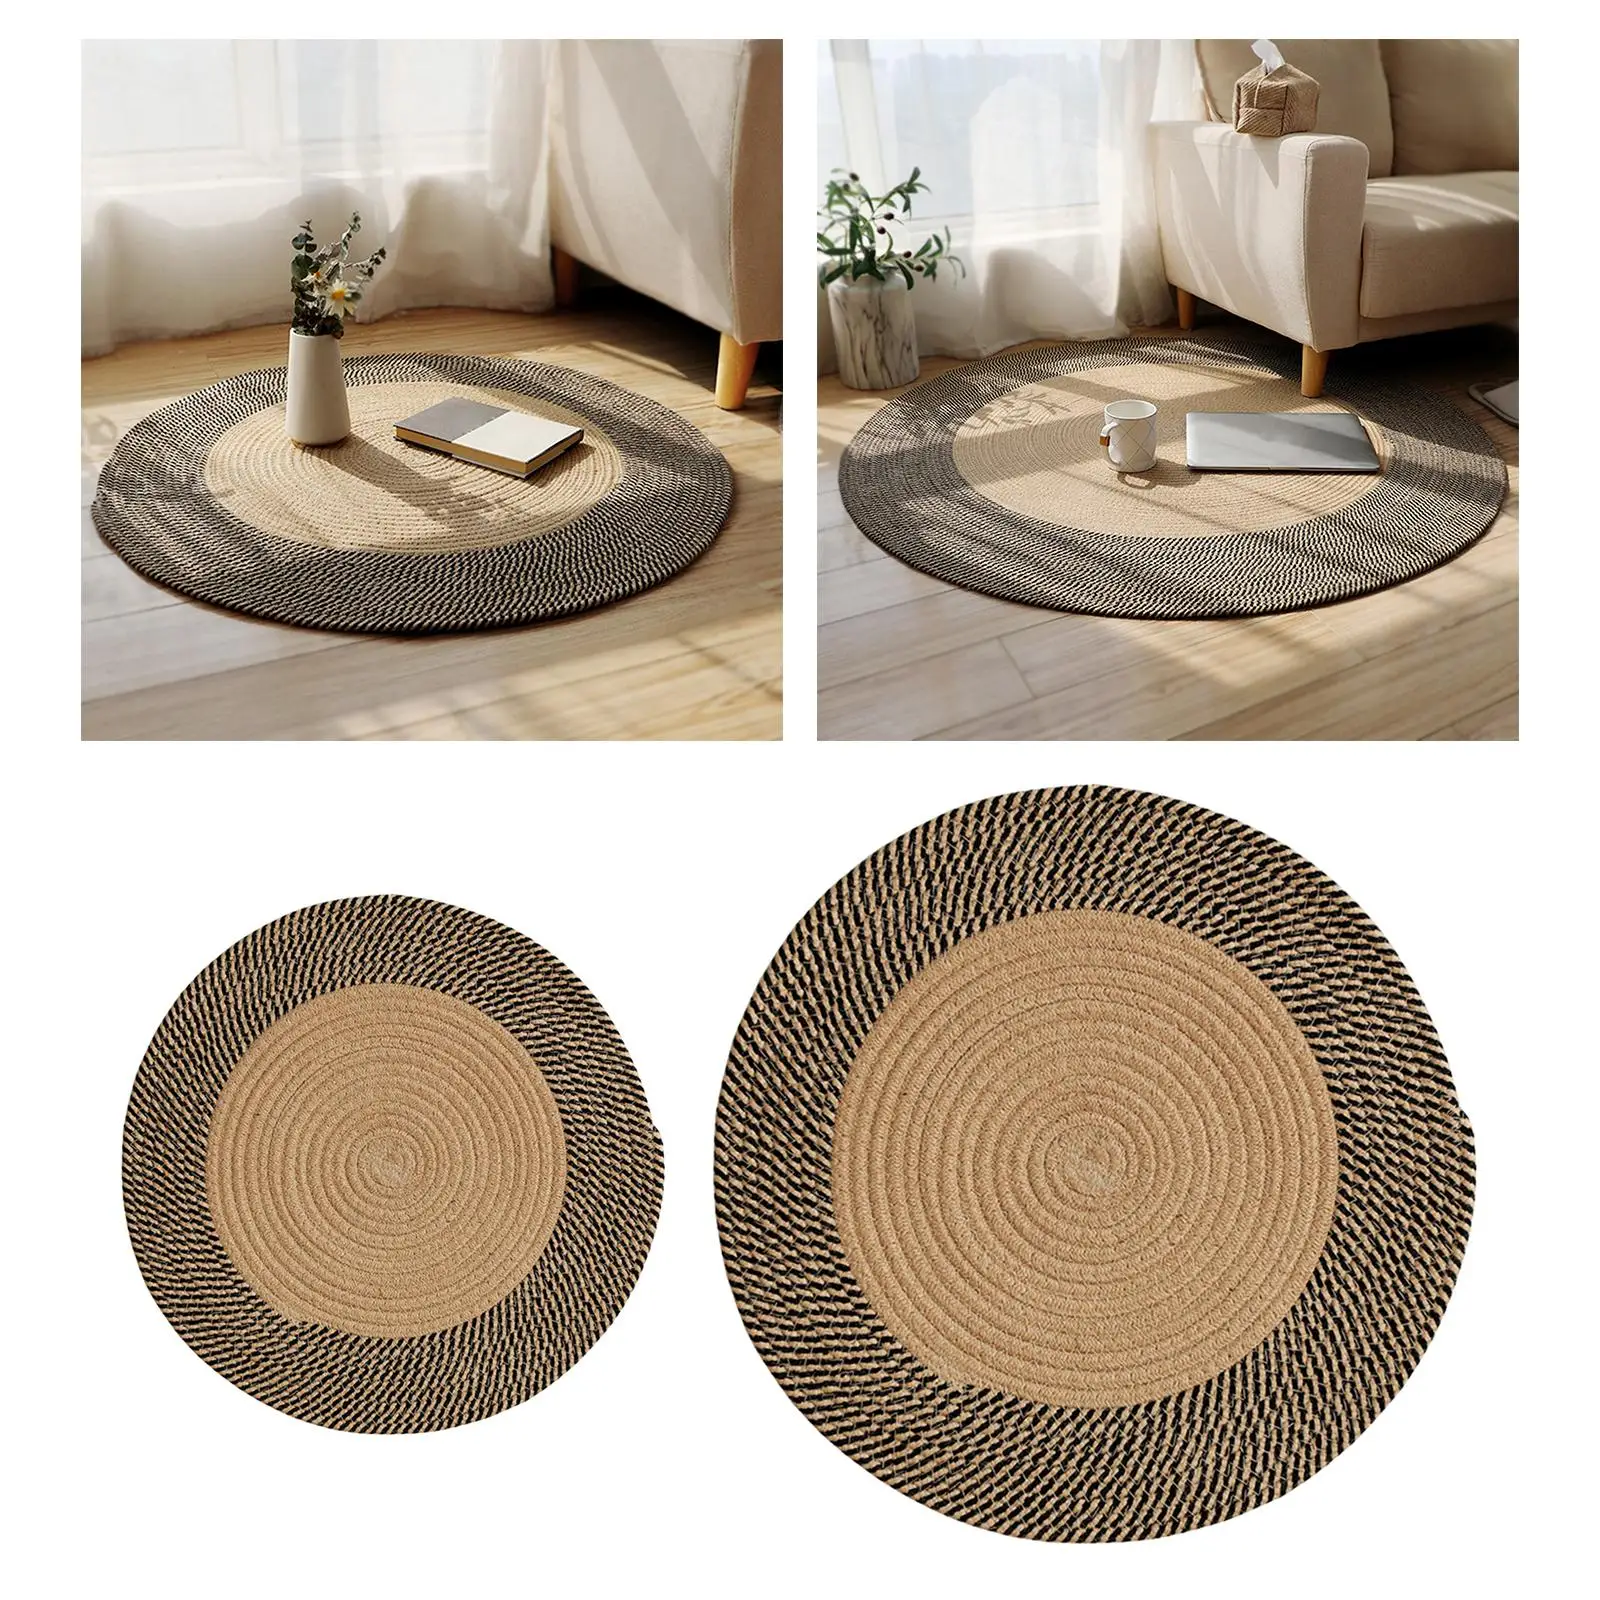 Hand Woven Jute Braided Rug Soft Carpet Eco Friendly for Kitchen Entryway